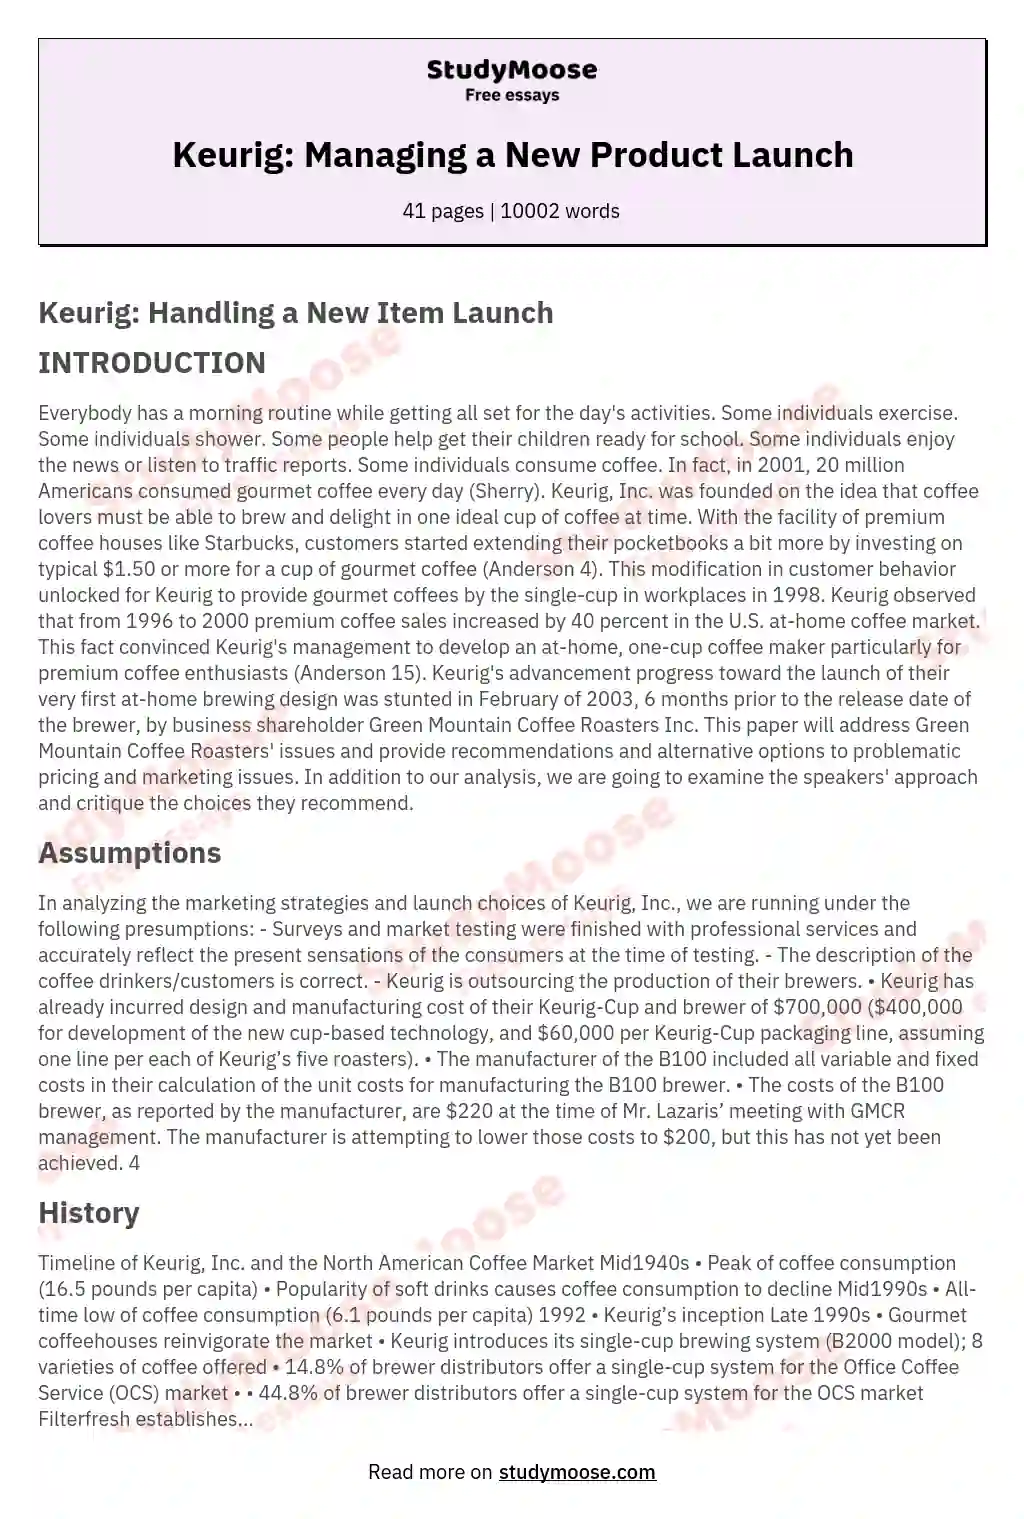 Keurig: Managing a New Product Launch